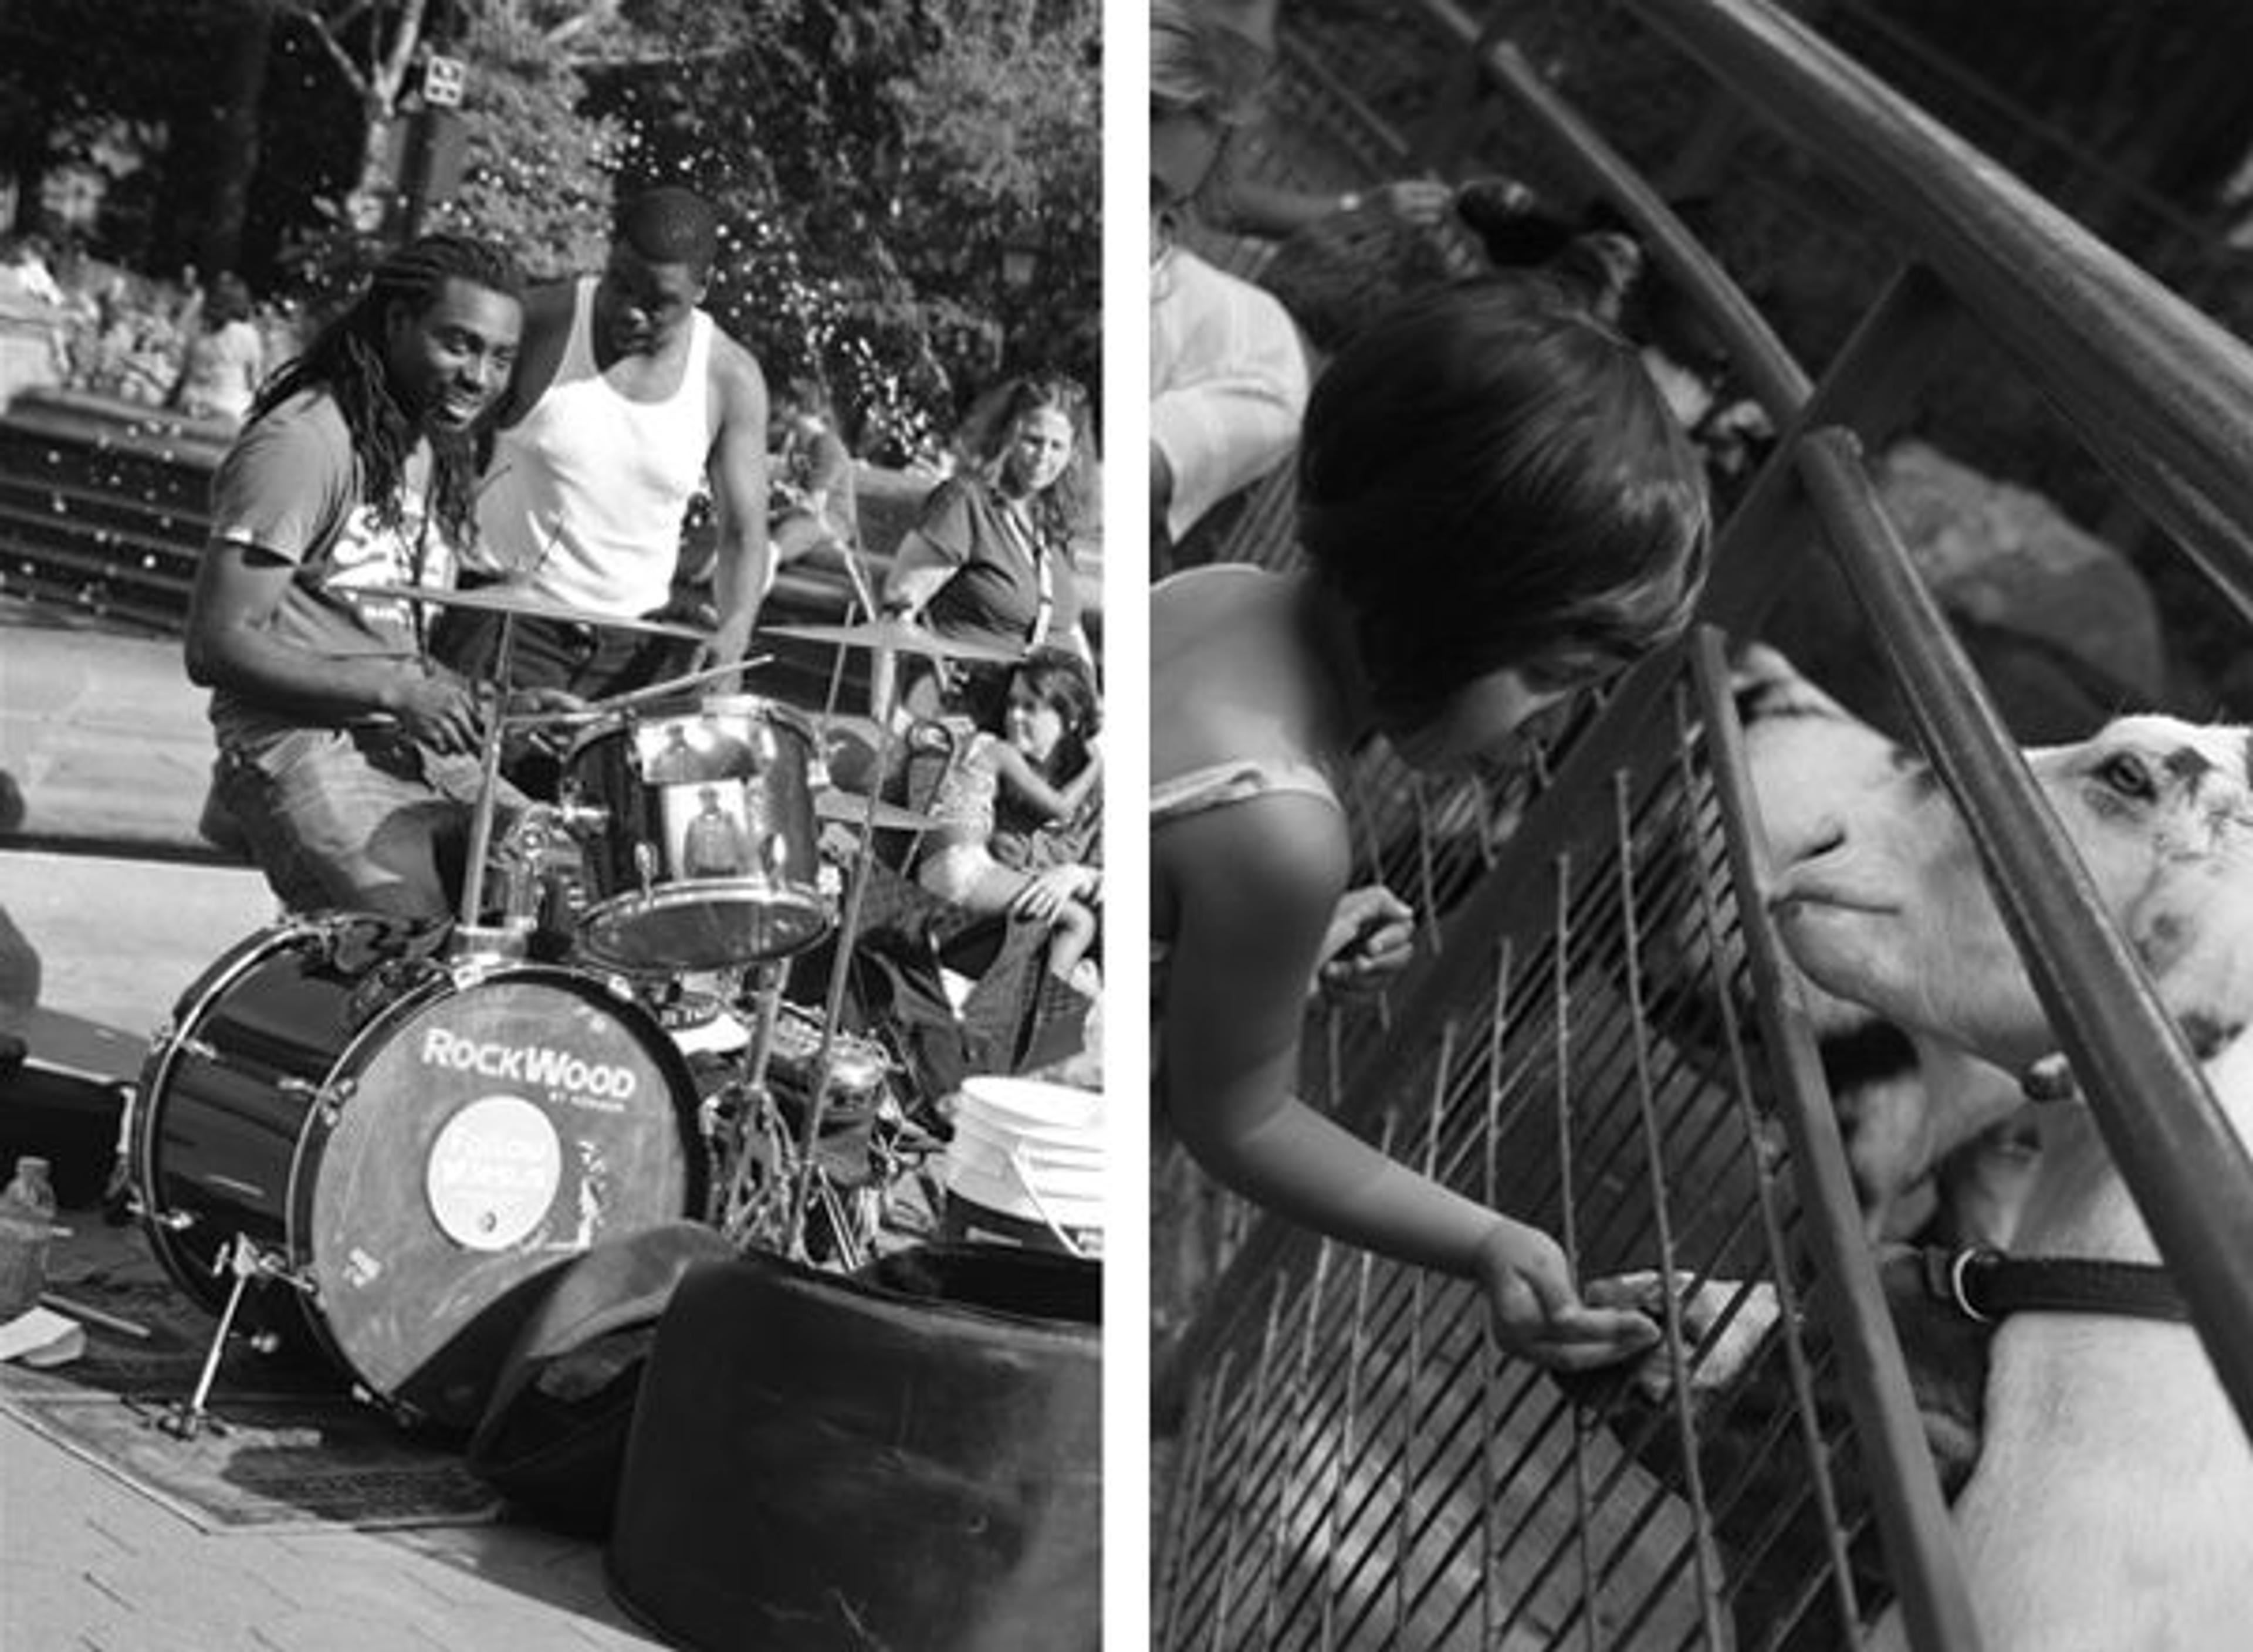 Left: Photograph of band in an outdoor area. Right: Photograph of young girl feeding animals.